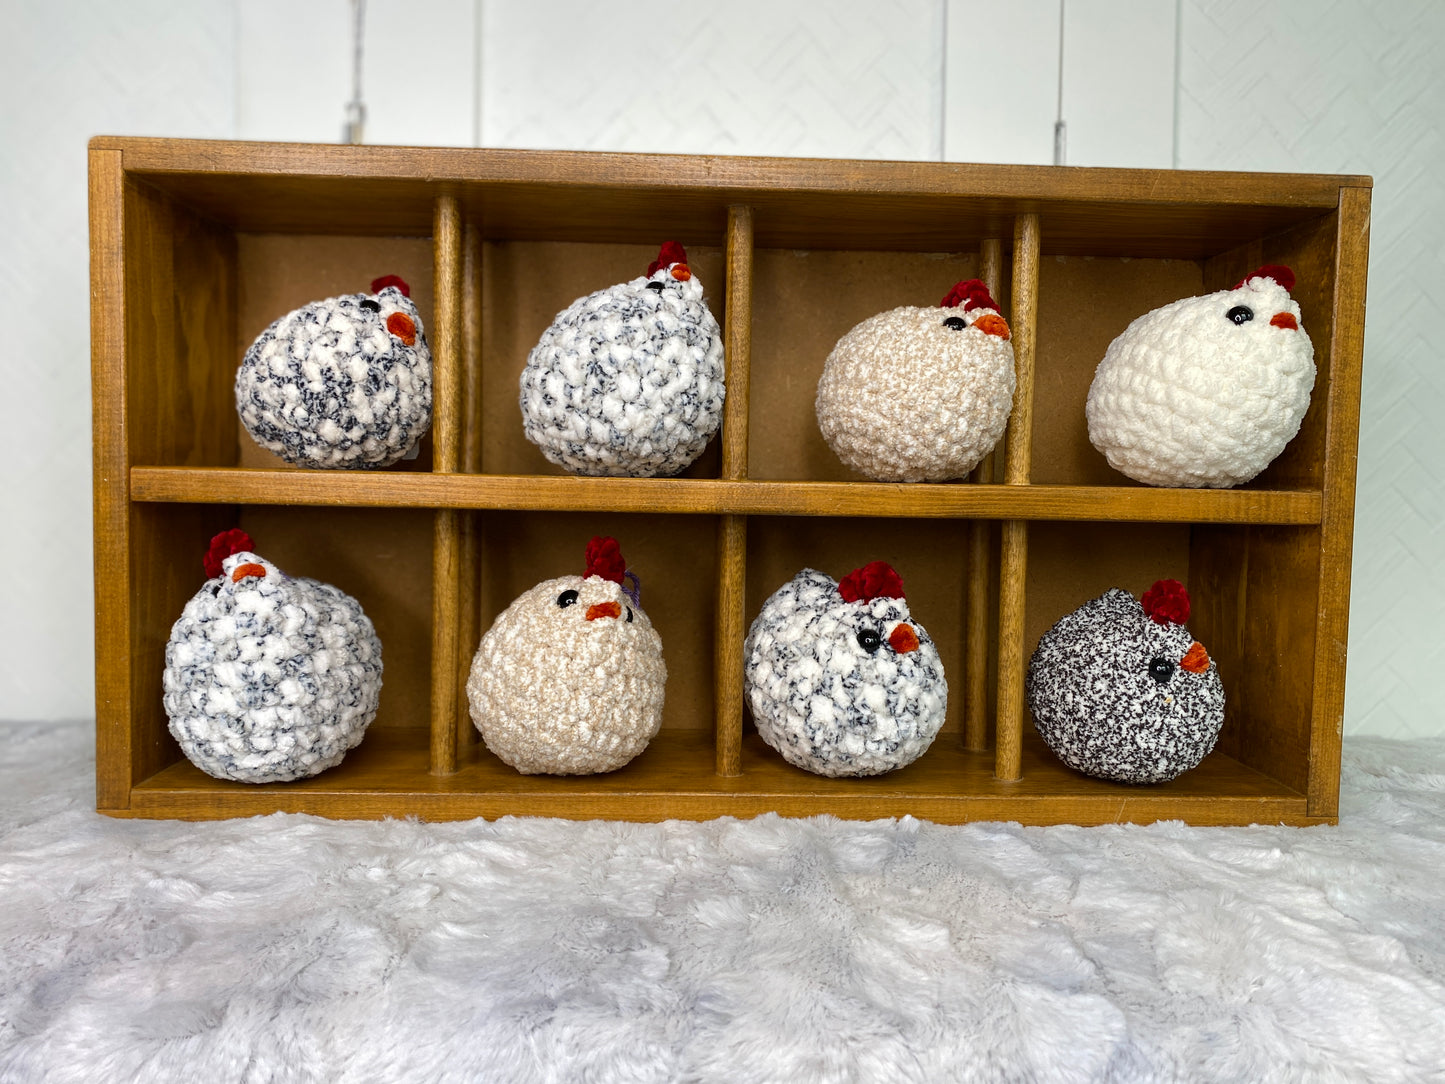 Small Chickens (Hand Crocheted)